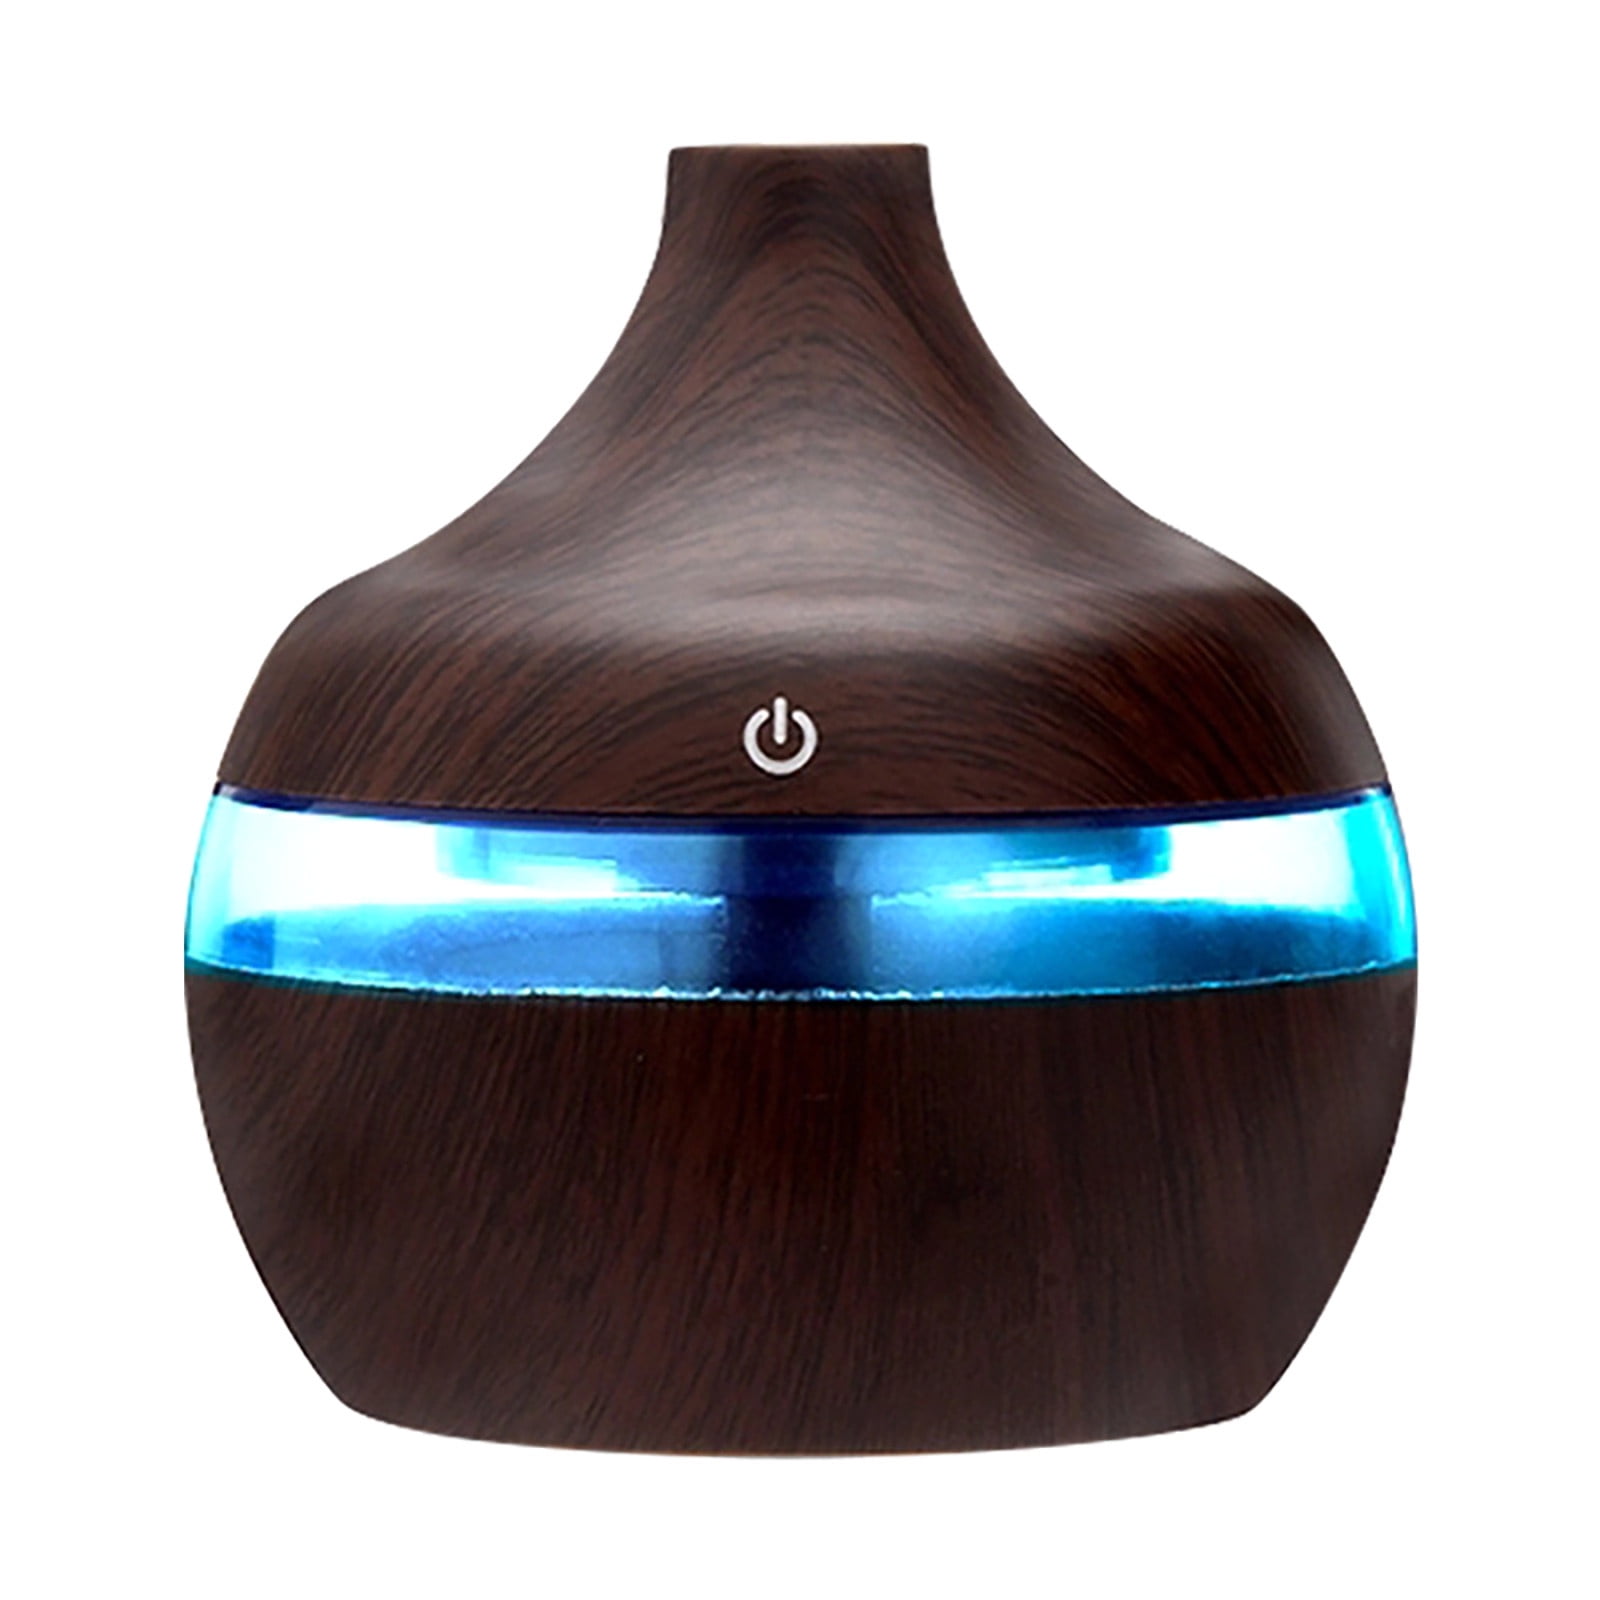 Details about   Air Aroma Humidifier Ultrasonic Aromatherapy Essential Oil Diffuser 300ml US 